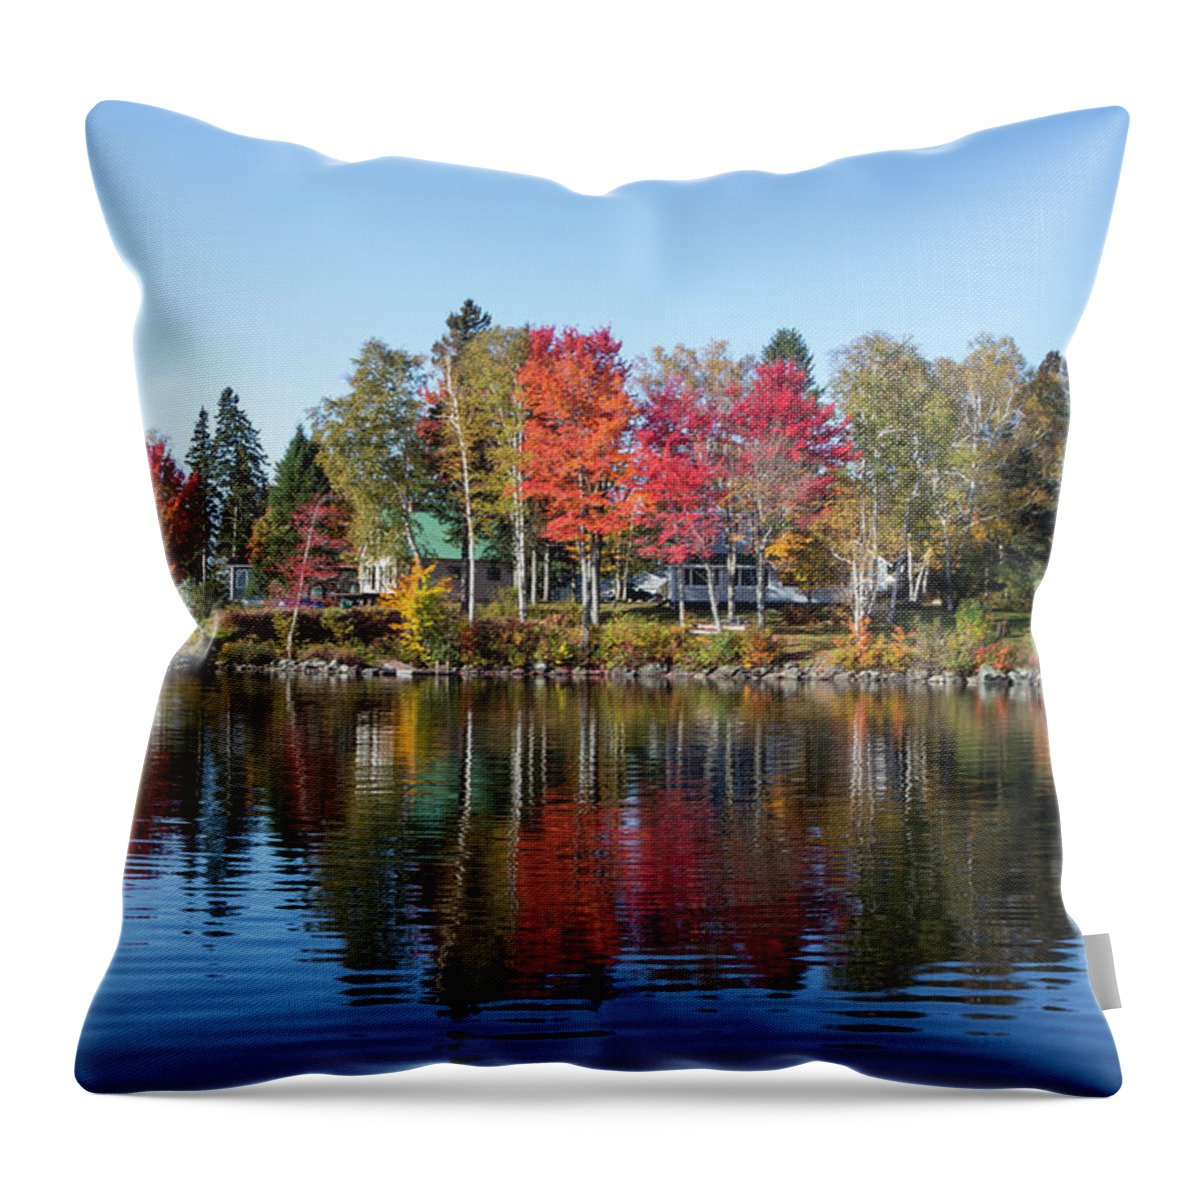 Foliage Throw Pillow featuring the photograph Popping Colors by Darryl Hendricks